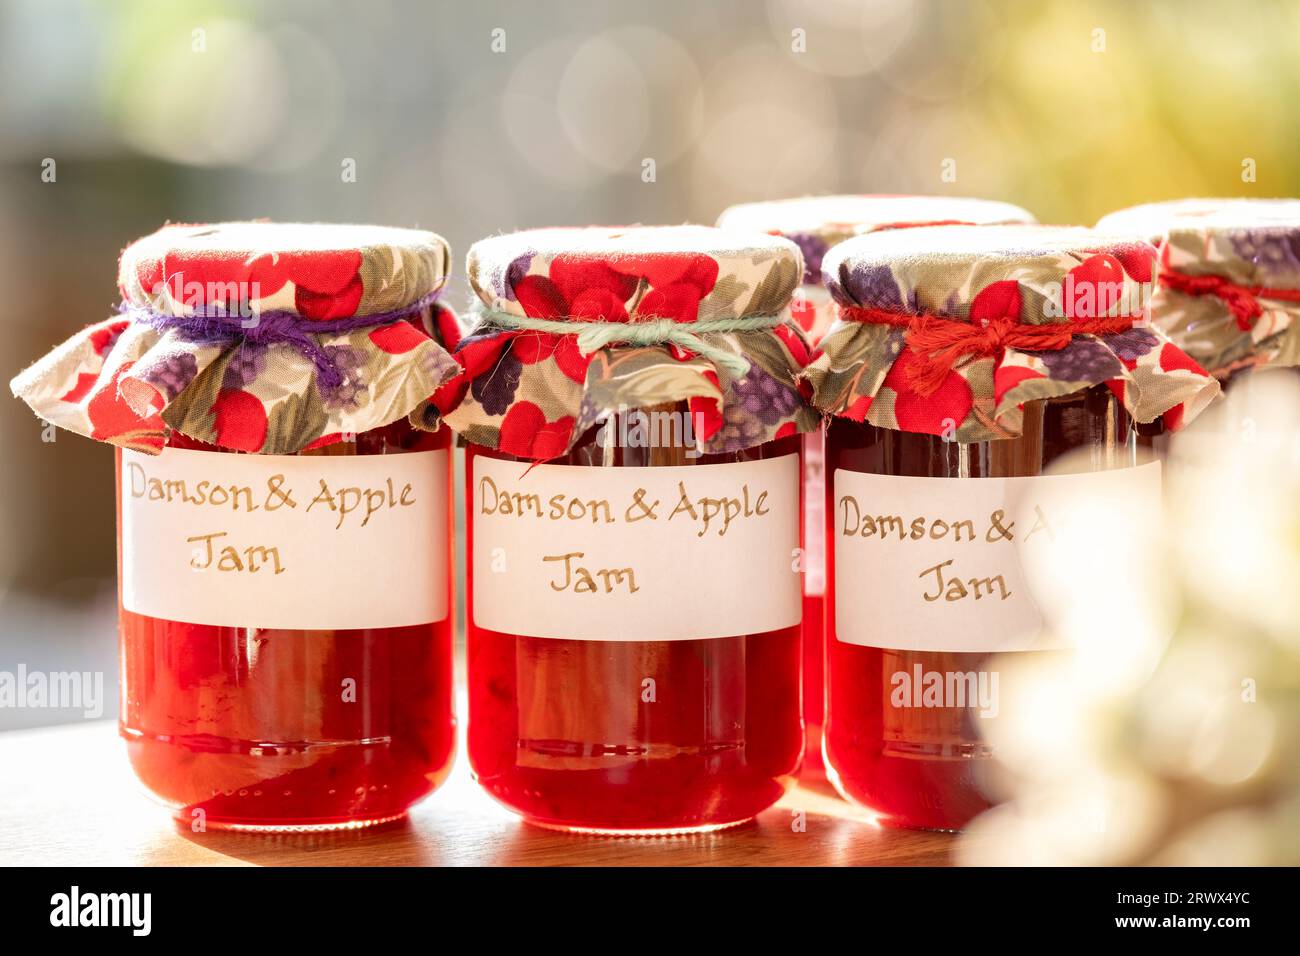 Jars of homemade Damson and Apple jam. The glass jars have clear handwritten labels and each jar has a cloth topping. Stock Photo